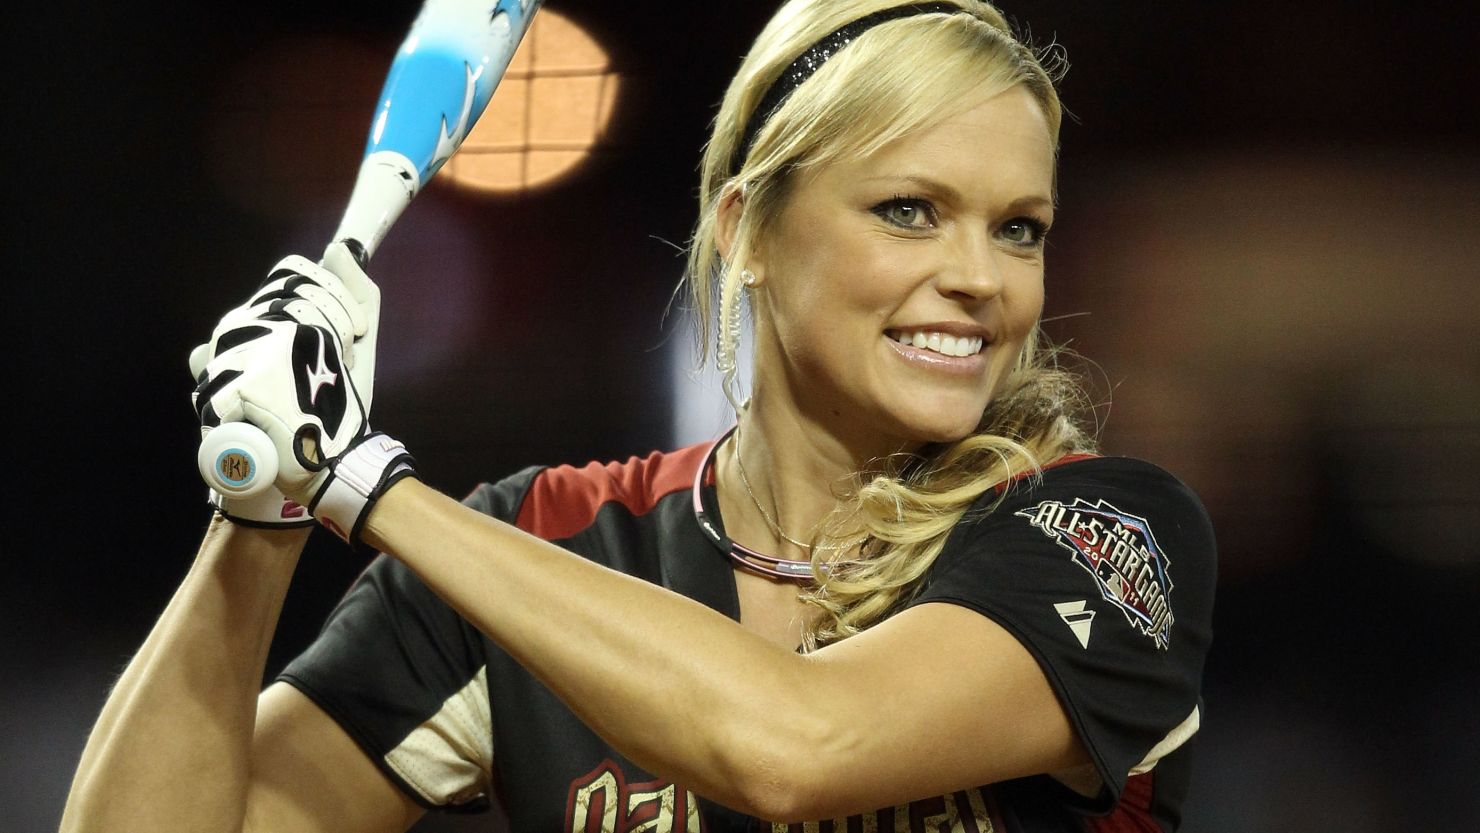 Jennie Finch warms up during the 2011 Taco Bell All-Star Legends & Celebrity Softball Game in Phoenix, Arizona.